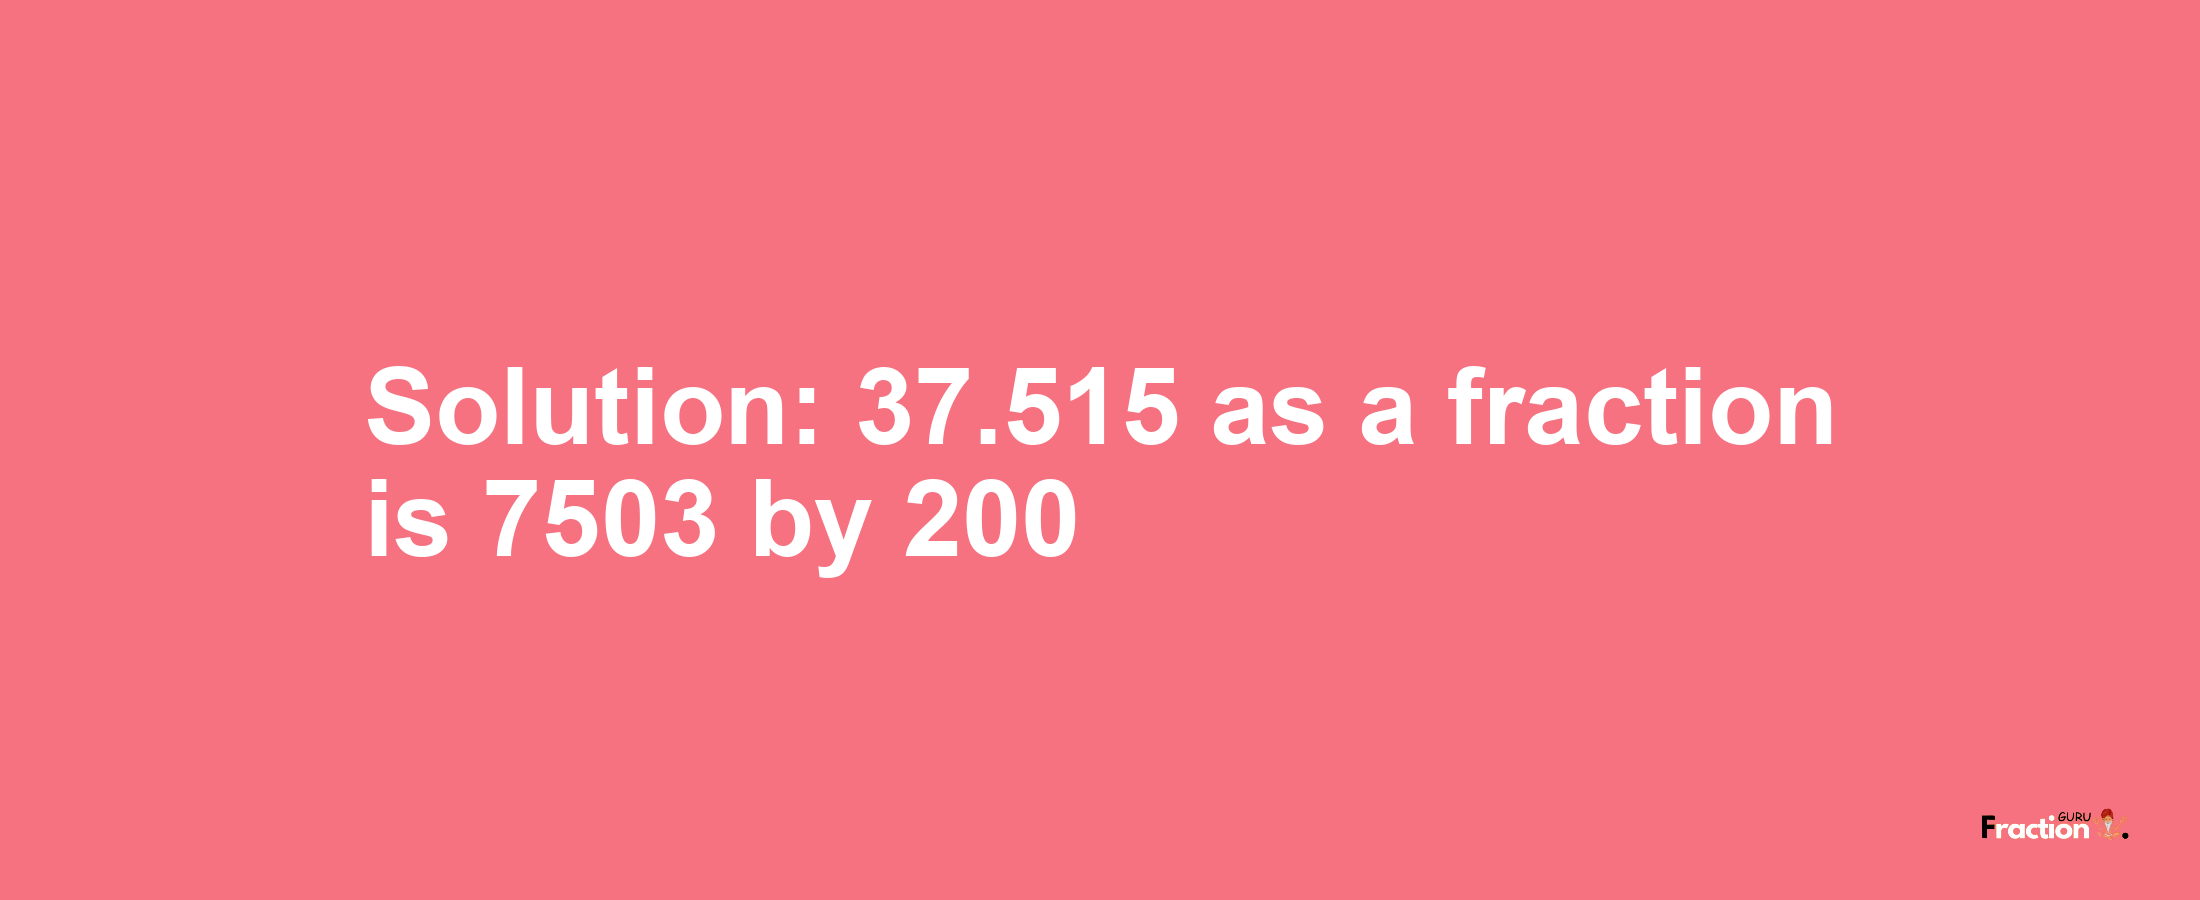 Solution:37.515 as a fraction is 7503/200